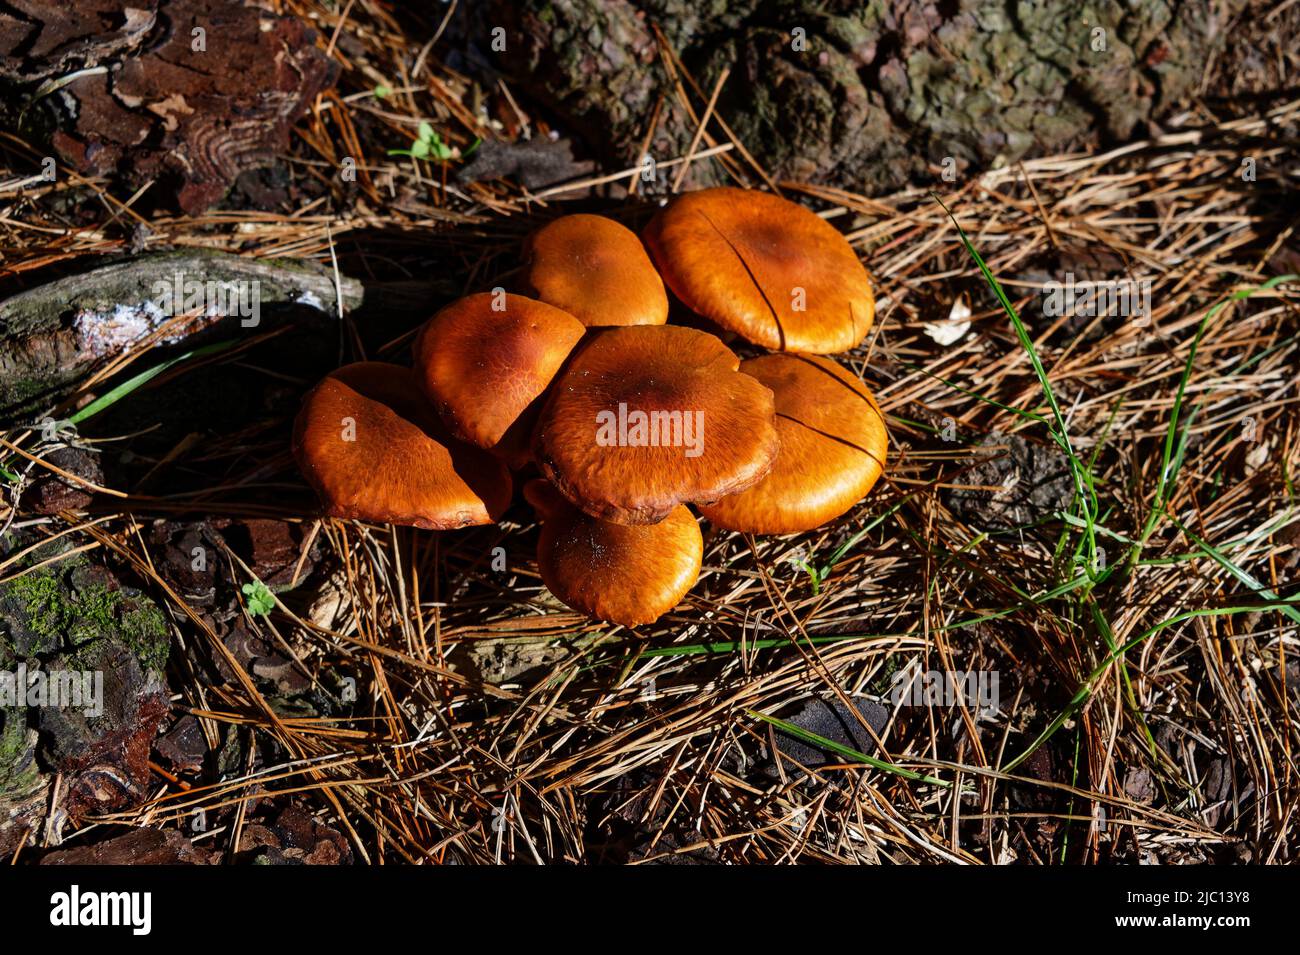 Mushrooms growing at the base of a tree are surround by the pine needles. Stock Photo